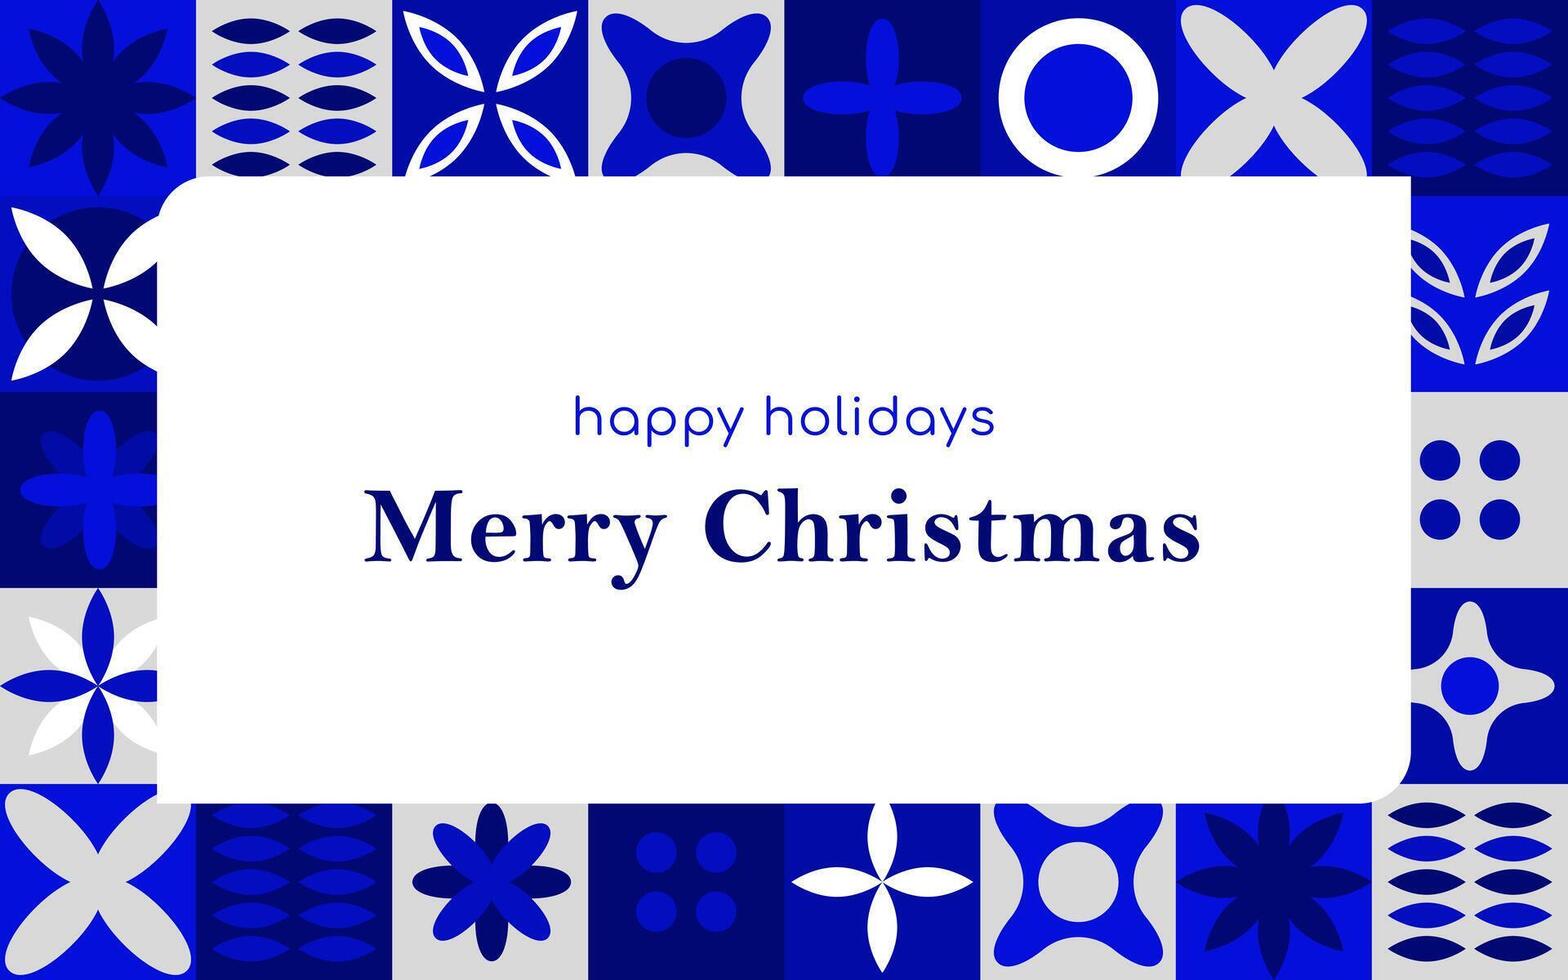 Text Merry Christmas and happy holidays with a geometric pattern. Blue tile pattern. Image on postcard vector